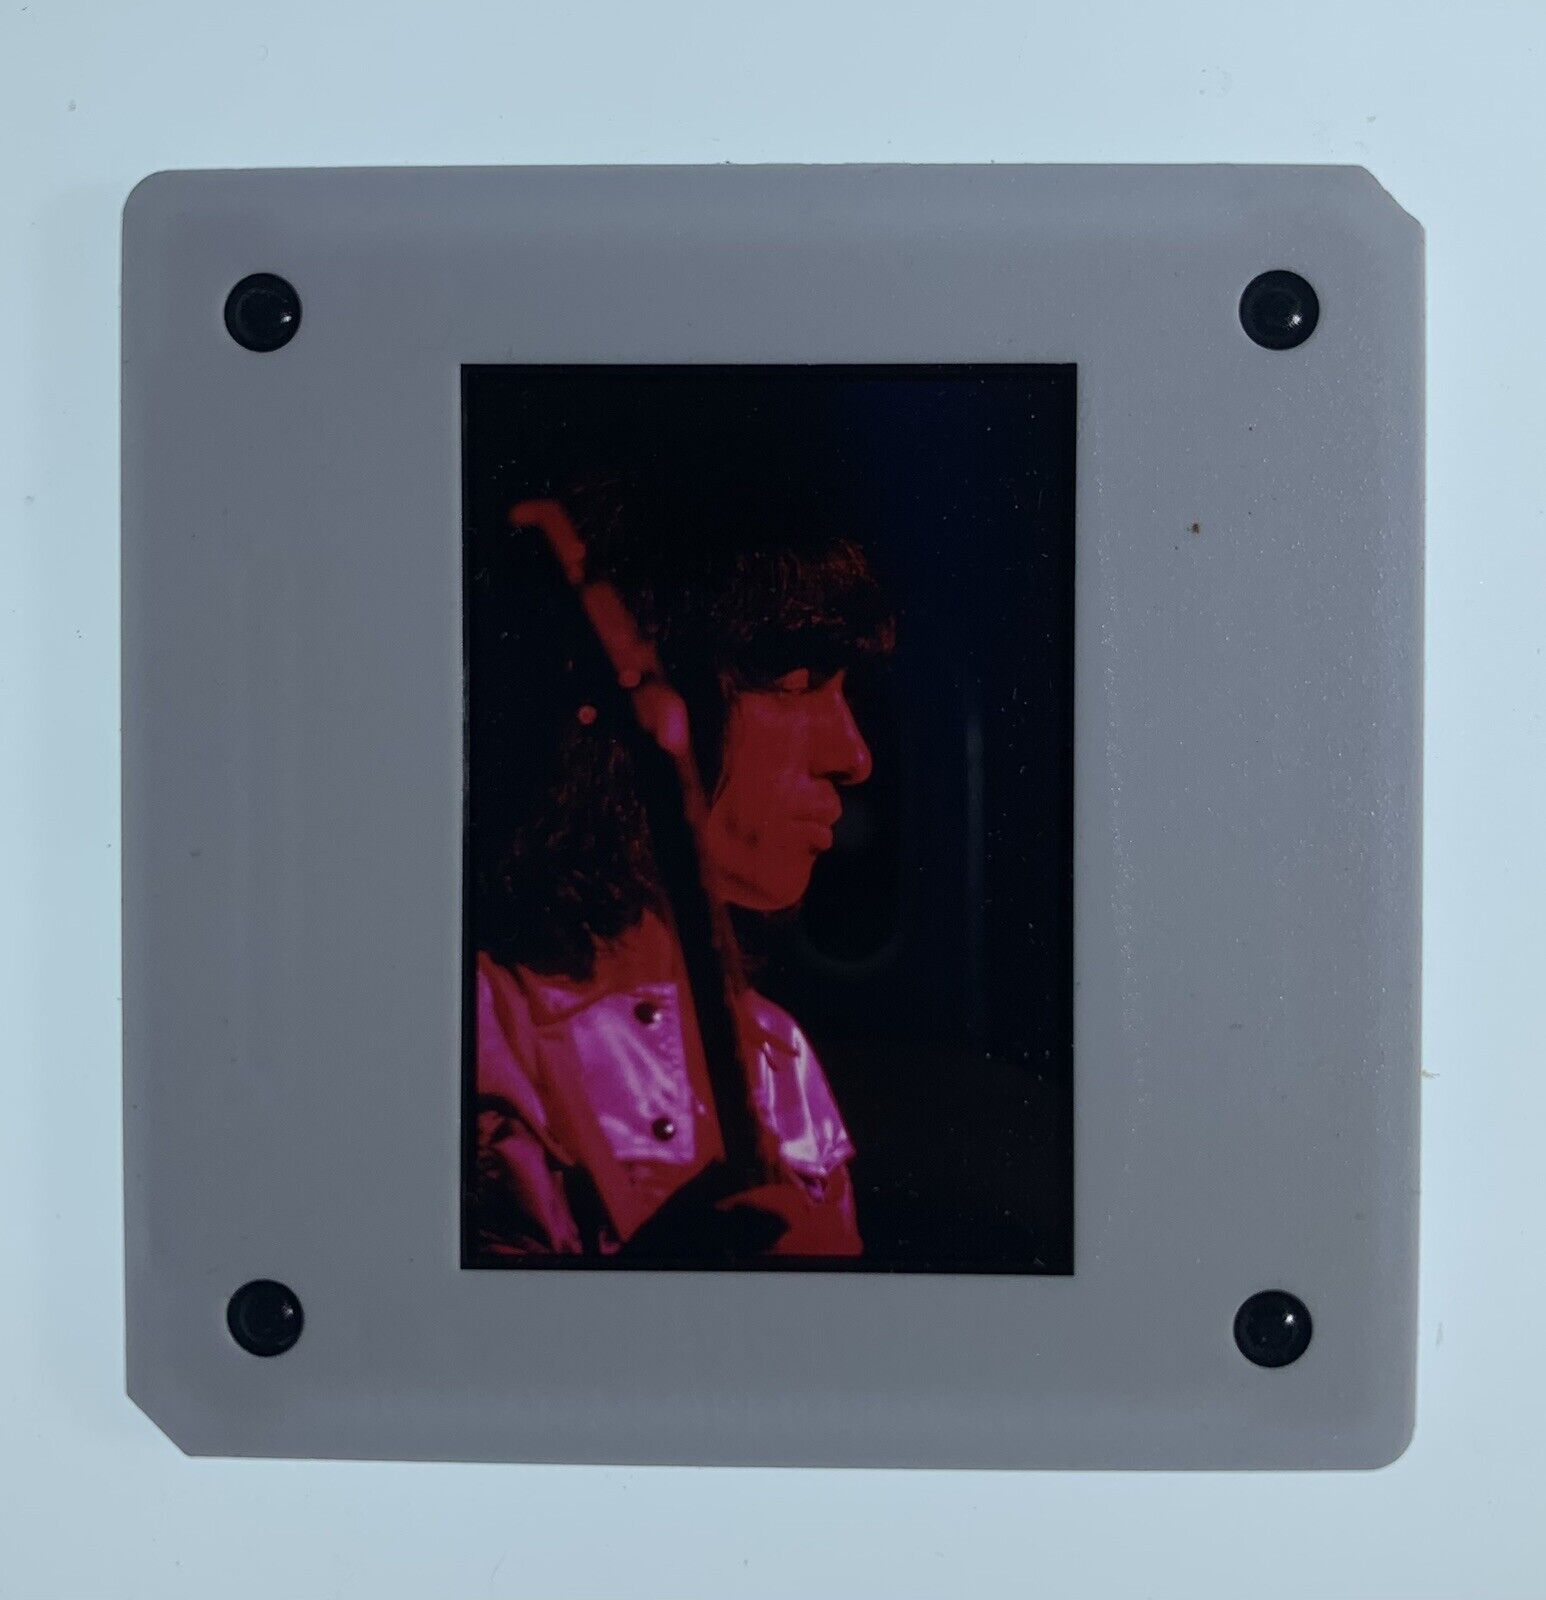 Rolling Stones Bill Wyman Transparency Positive Photographic Slide 1973